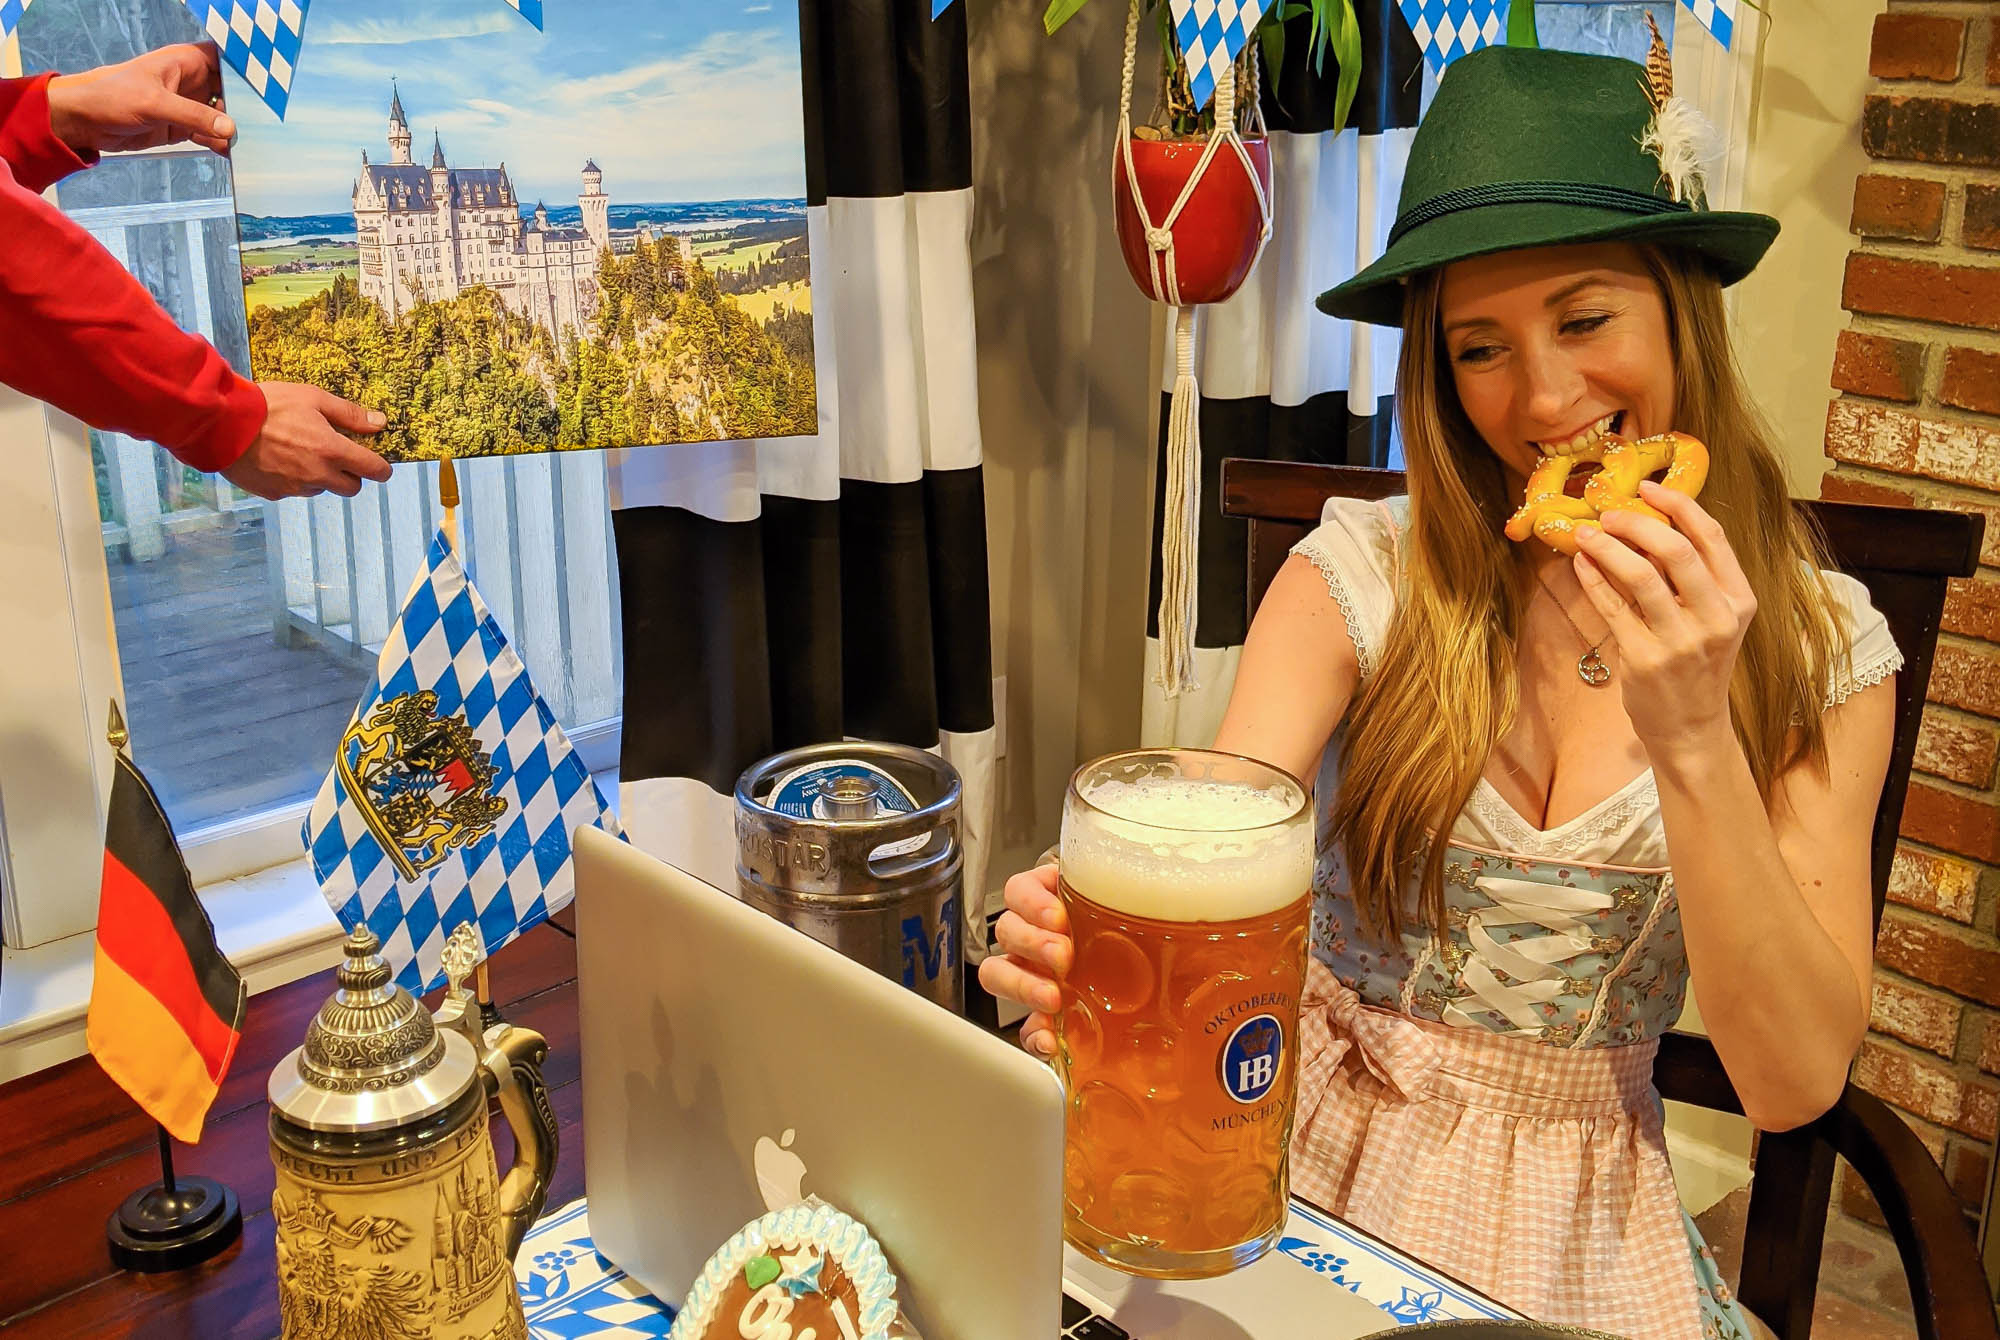 How To Throw An Oktoberfest Party 6 Steps To A Mock Munich